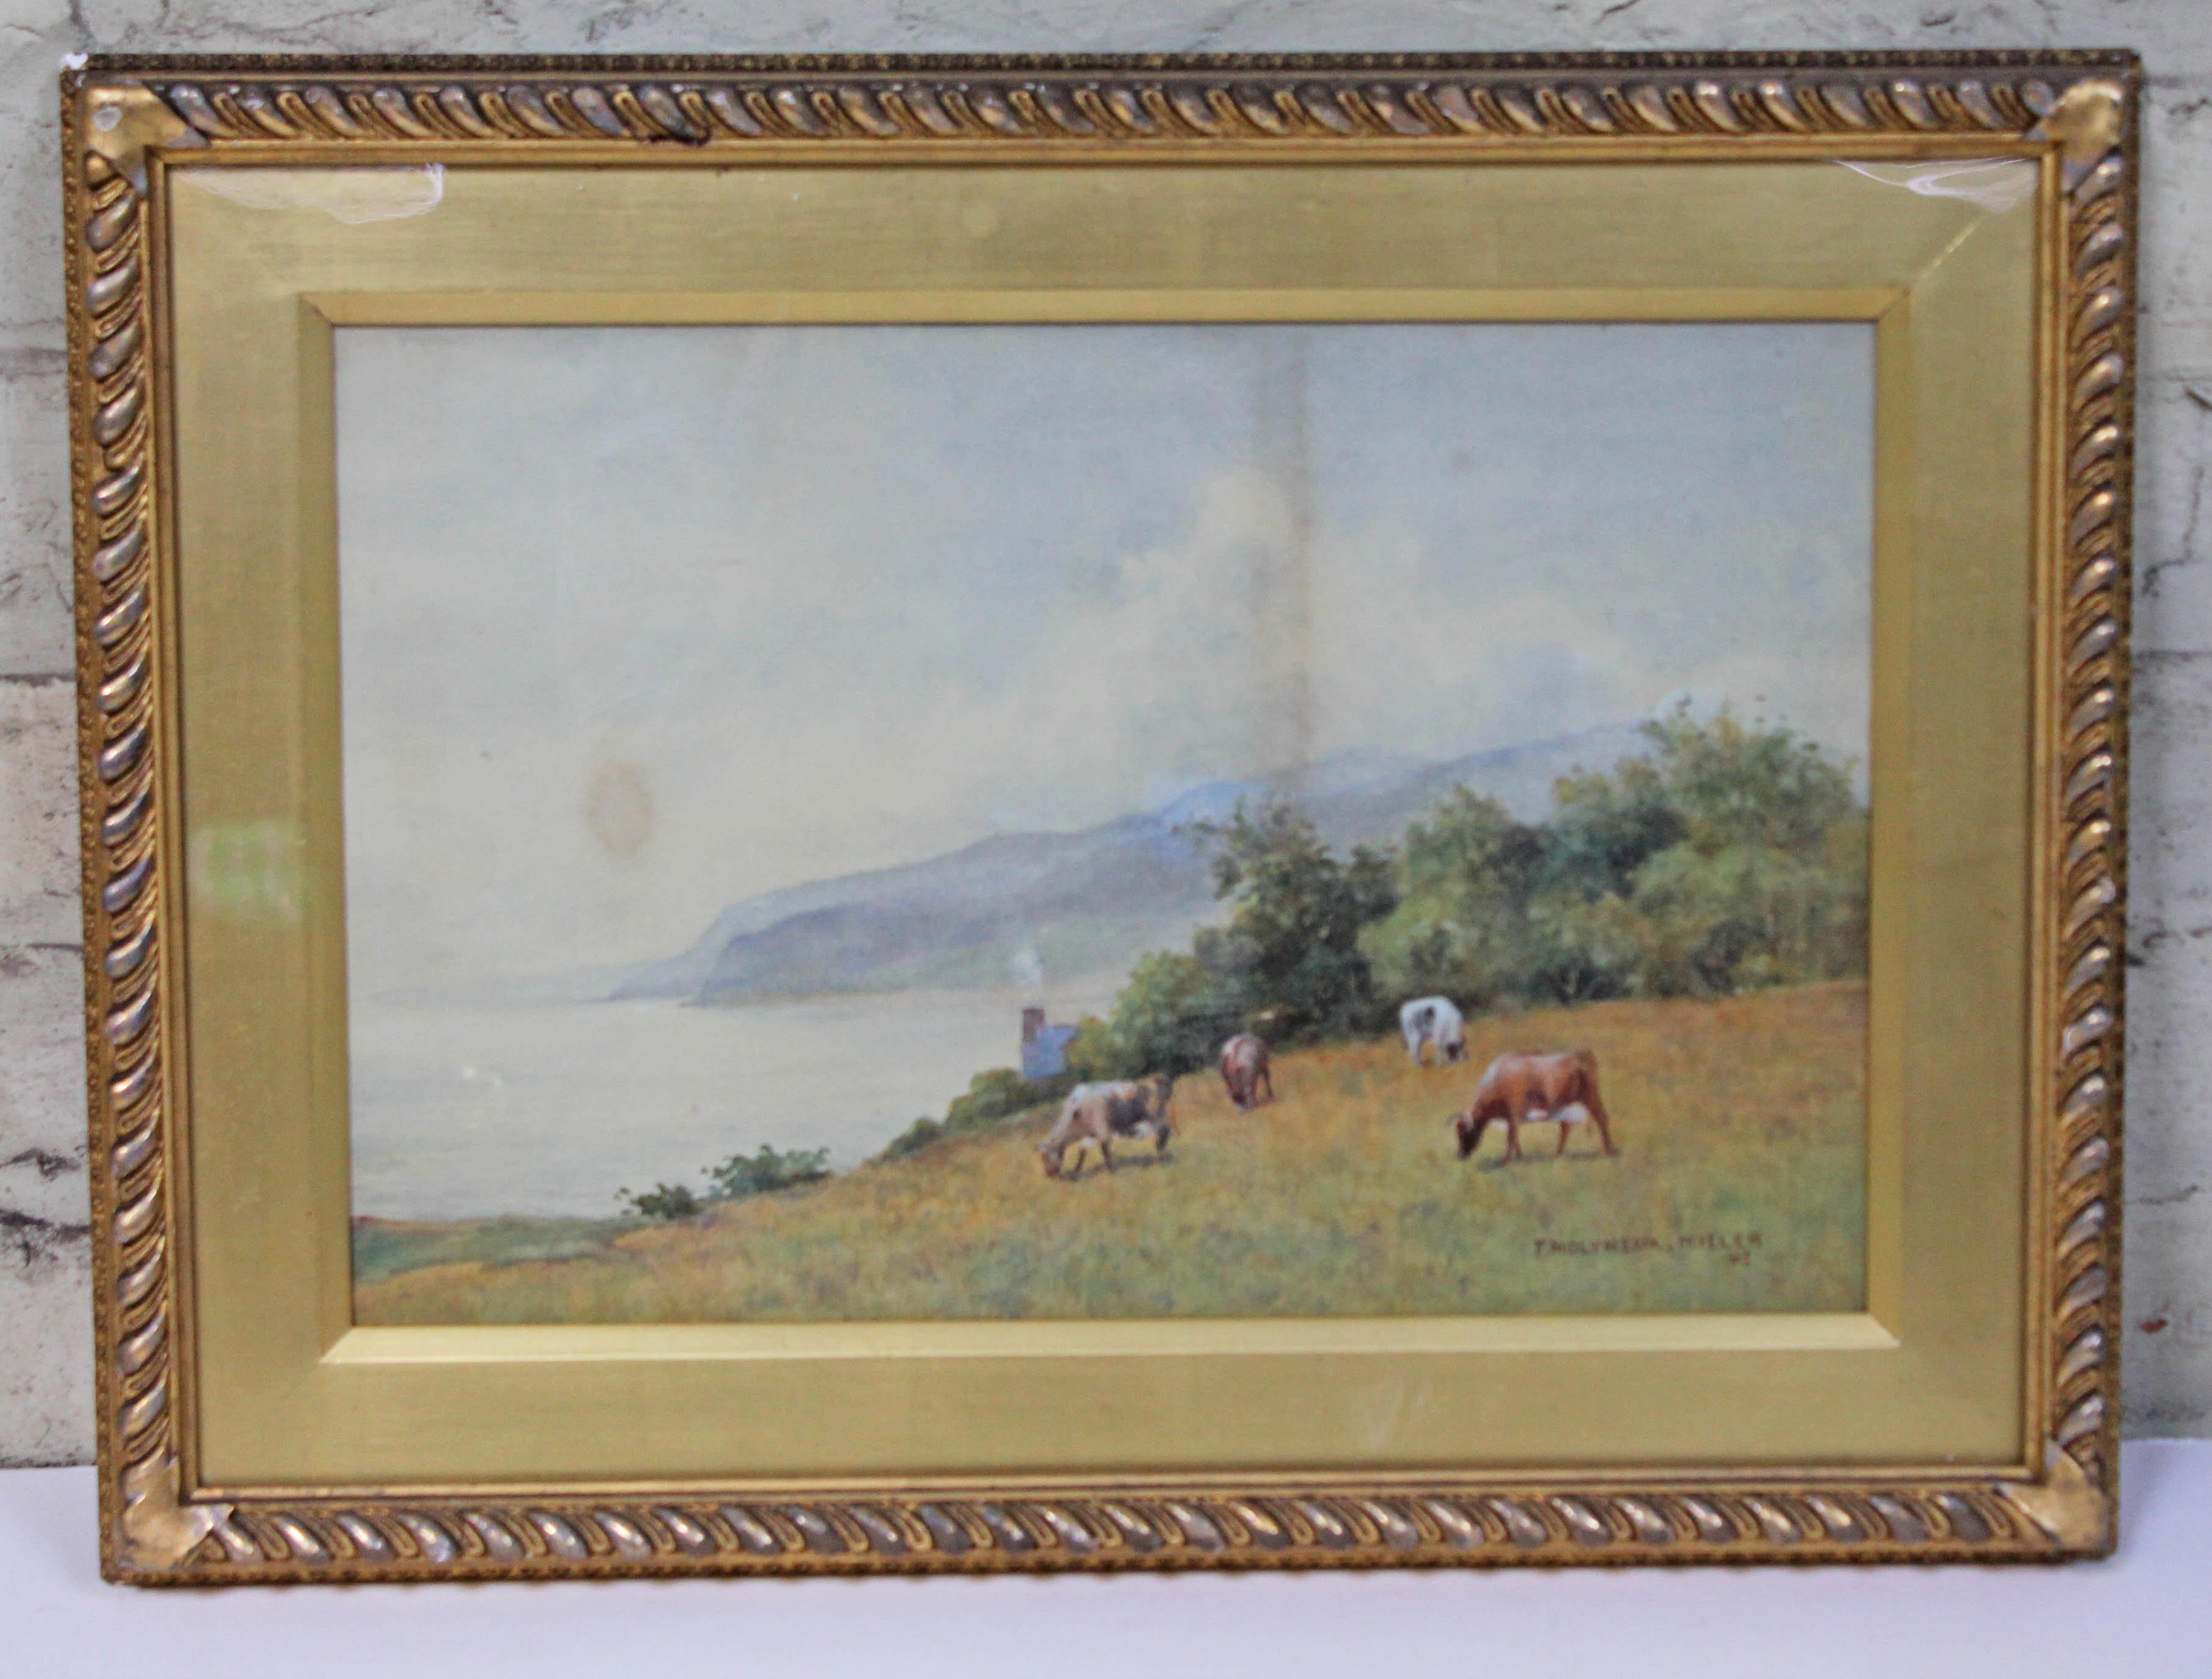 T Molyneux Miller, cattle grazing, watercolour, 44cm x 28cm, signed lower right and dated '93,